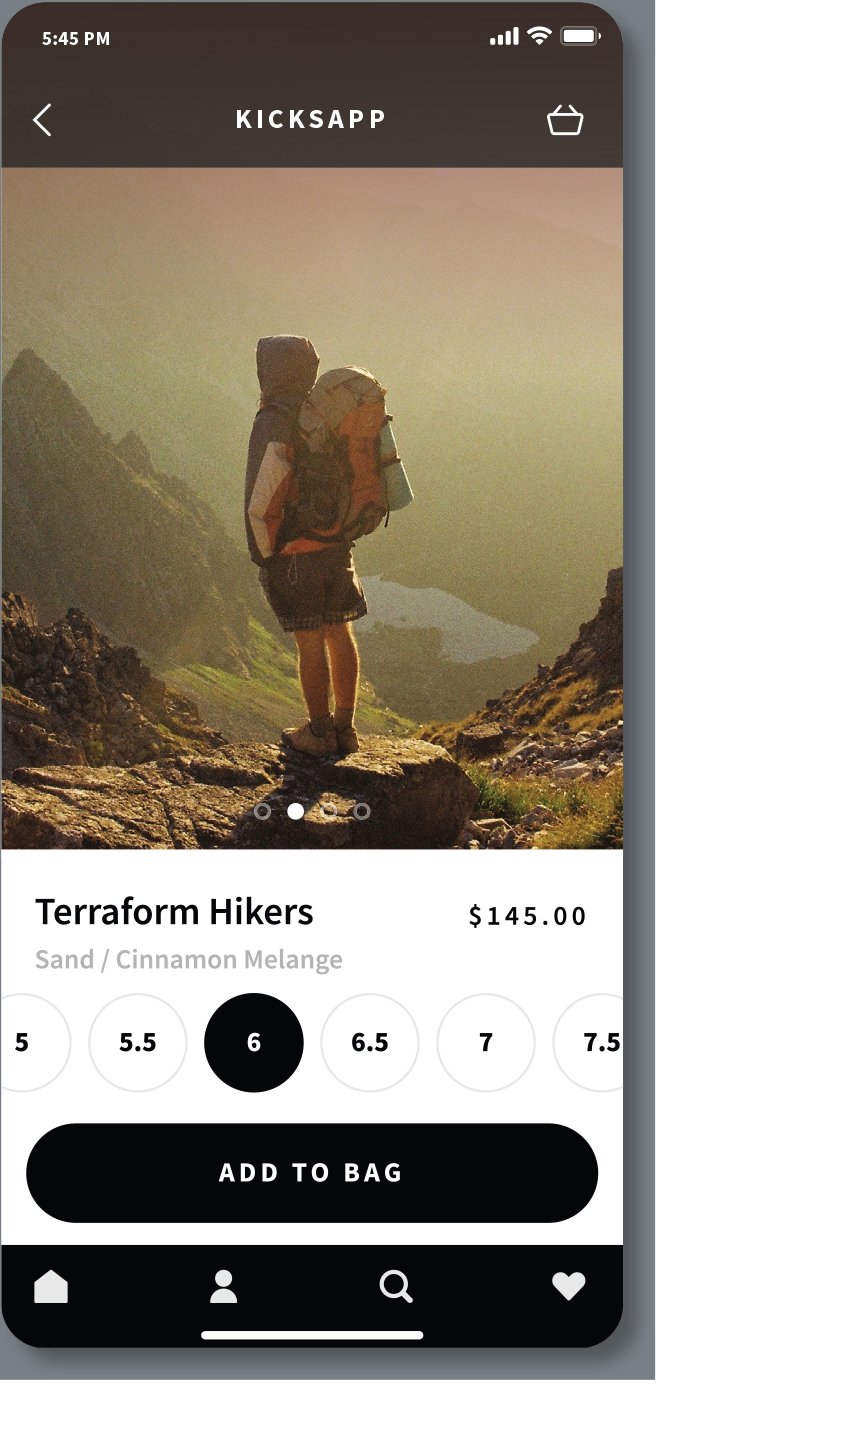 An artwork resembles a mobile screenshot of Kicksapp. It shows a hiker with backpacks standing on a mountain ridge.